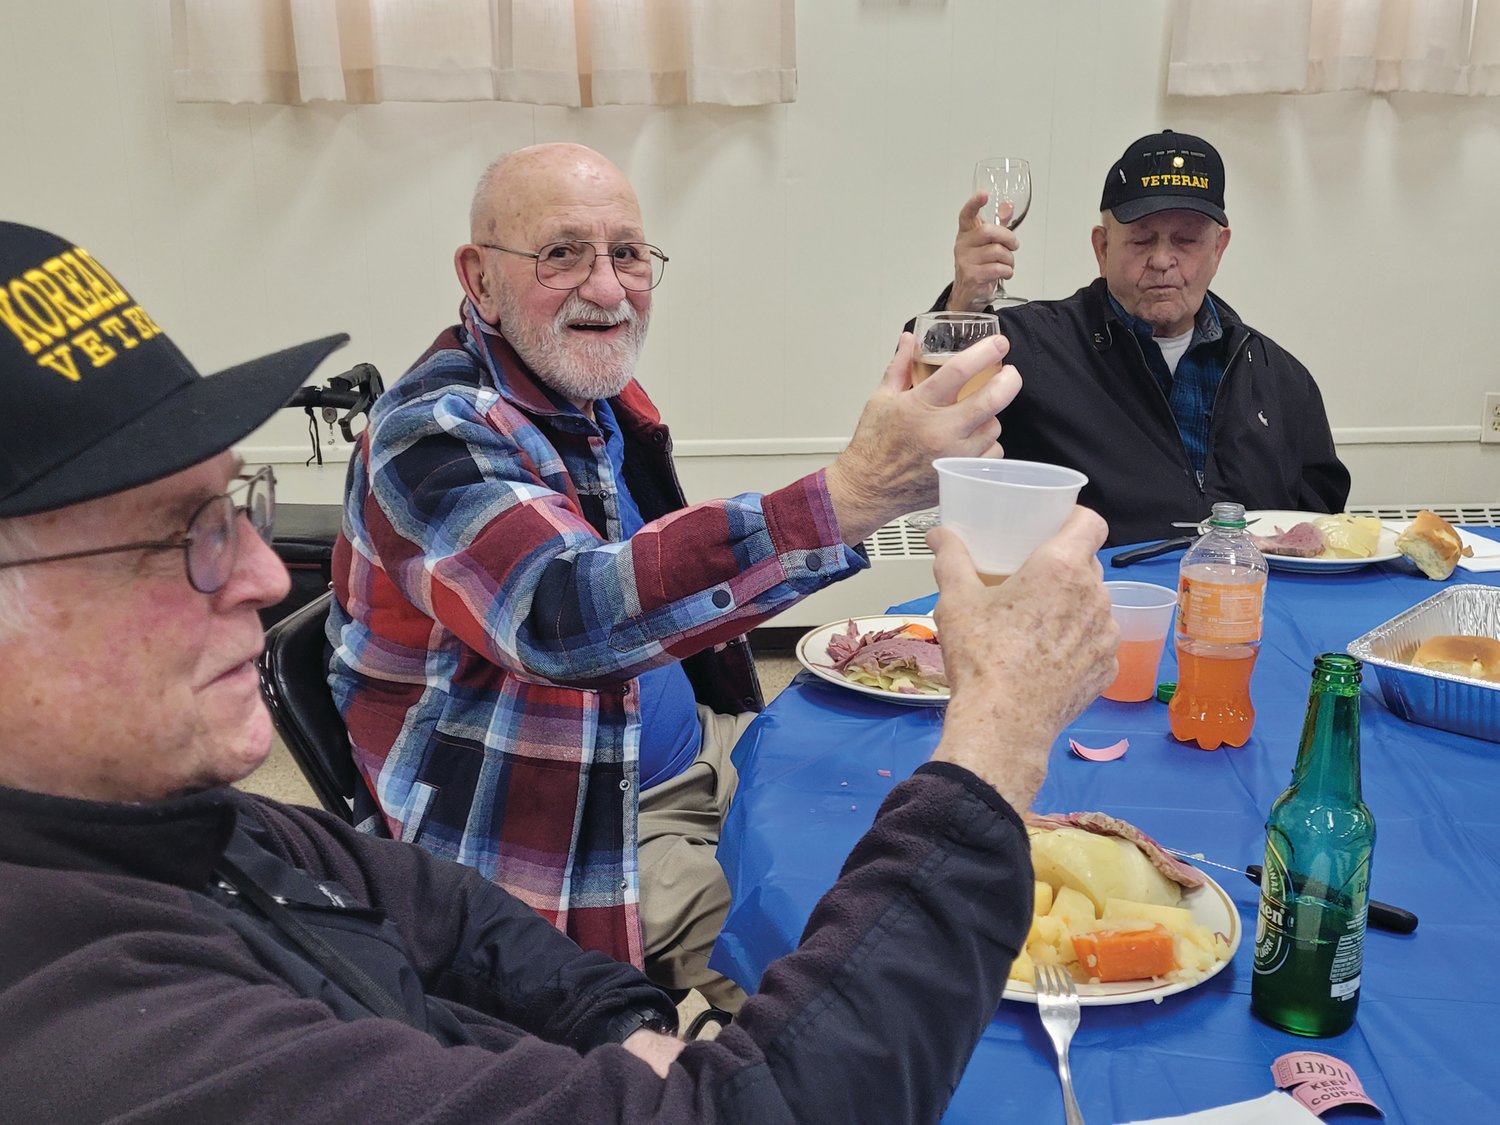 CHEERS: Ernie Cafolla, 97, at right, lifts his glass to toast his table-mates — Joe Mullen, 90, a Seekonk native and ex-Army first lieutenant; Donald LaBelle, 91, formerly of Charlestown, a former Air Force airman first class — who all lifted their bottles and goblets. (Sun Rise photos by Rory Schuler)